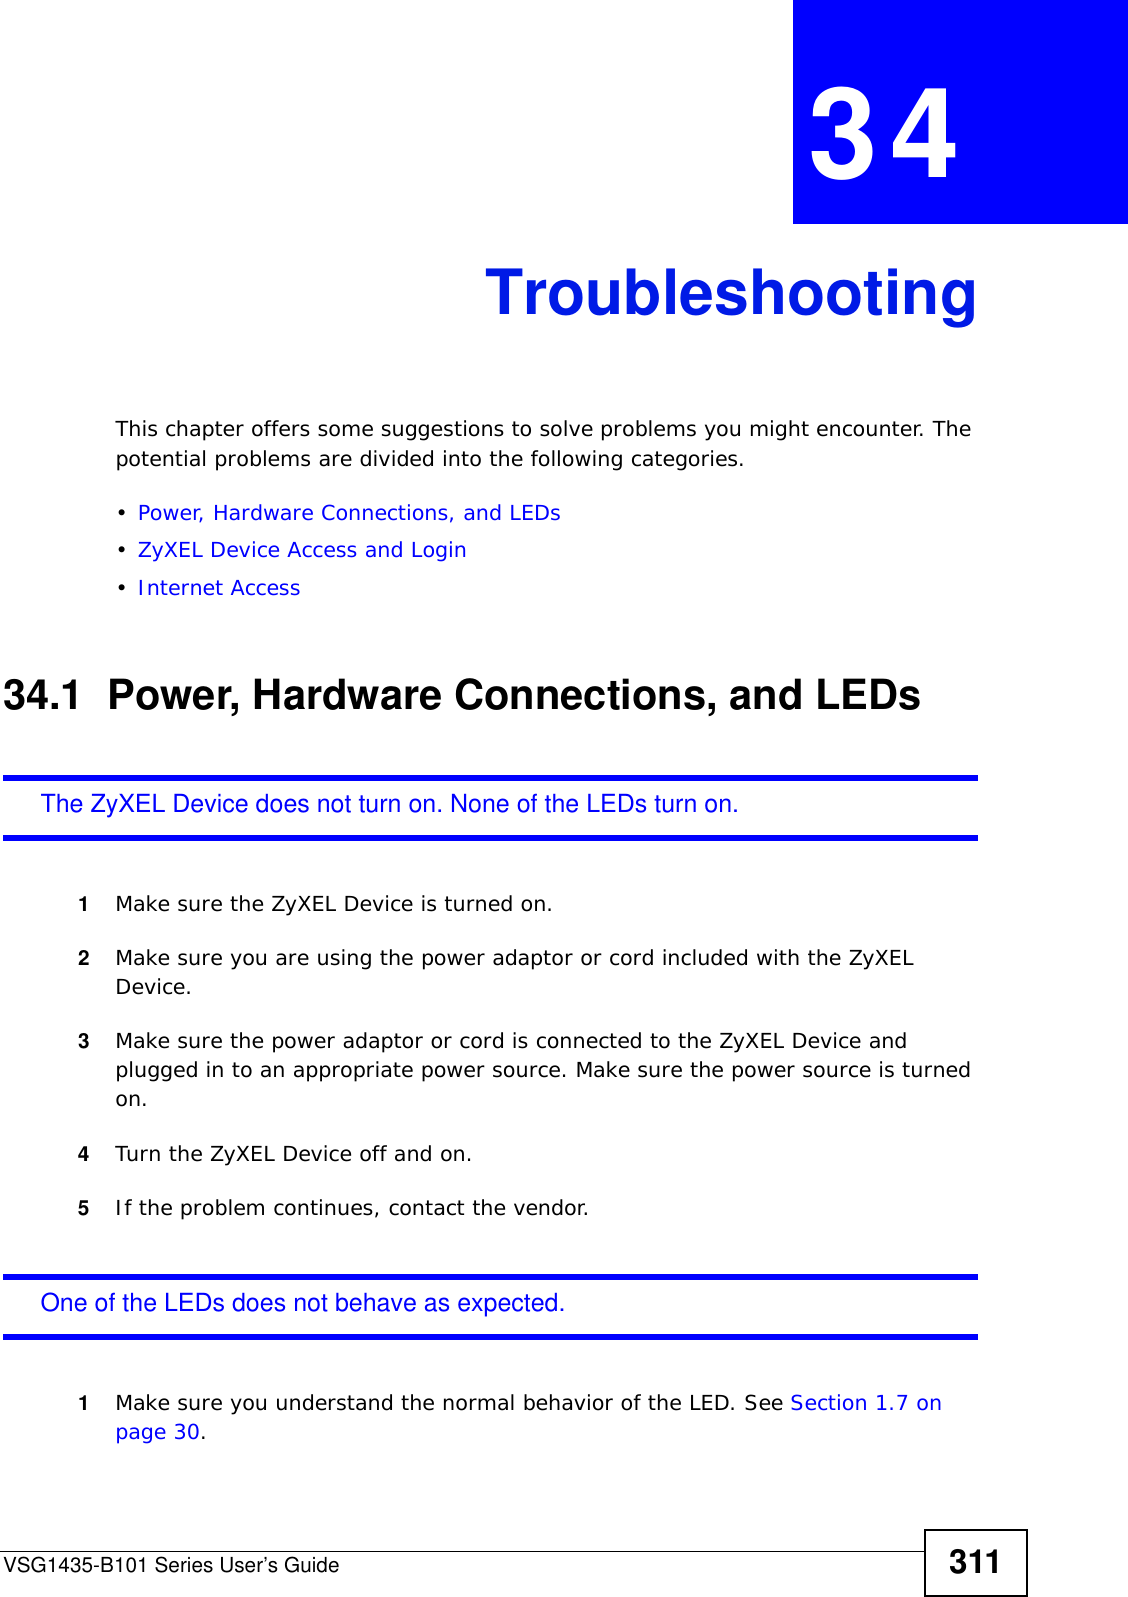 VSG1435-B101 Series User’s Guide 311CHAPTER  34 TroubleshootingThis chapter offers some suggestions to solve problems you might encounter. The potential problems are divided into the following categories. •Power, Hardware Connections, and LEDs•ZyXEL Device Access and Login•Internet Access34.1  Power, Hardware Connections, and LEDsThe ZyXEL Device does not turn on. None of the LEDs turn on.1Make sure the ZyXEL Device is turned on. 2Make sure you are using the power adaptor or cord included with the ZyXEL Device.3Make sure the power adaptor or cord is connected to the ZyXEL Device and plugged in to an appropriate power source. Make sure the power source is turned on.4Turn the ZyXEL Device off and on.5If the problem continues, contact the vendor.One of the LEDs does not behave as expected.1Make sure you understand the normal behavior of the LED. See Section 1.7 on page 30.